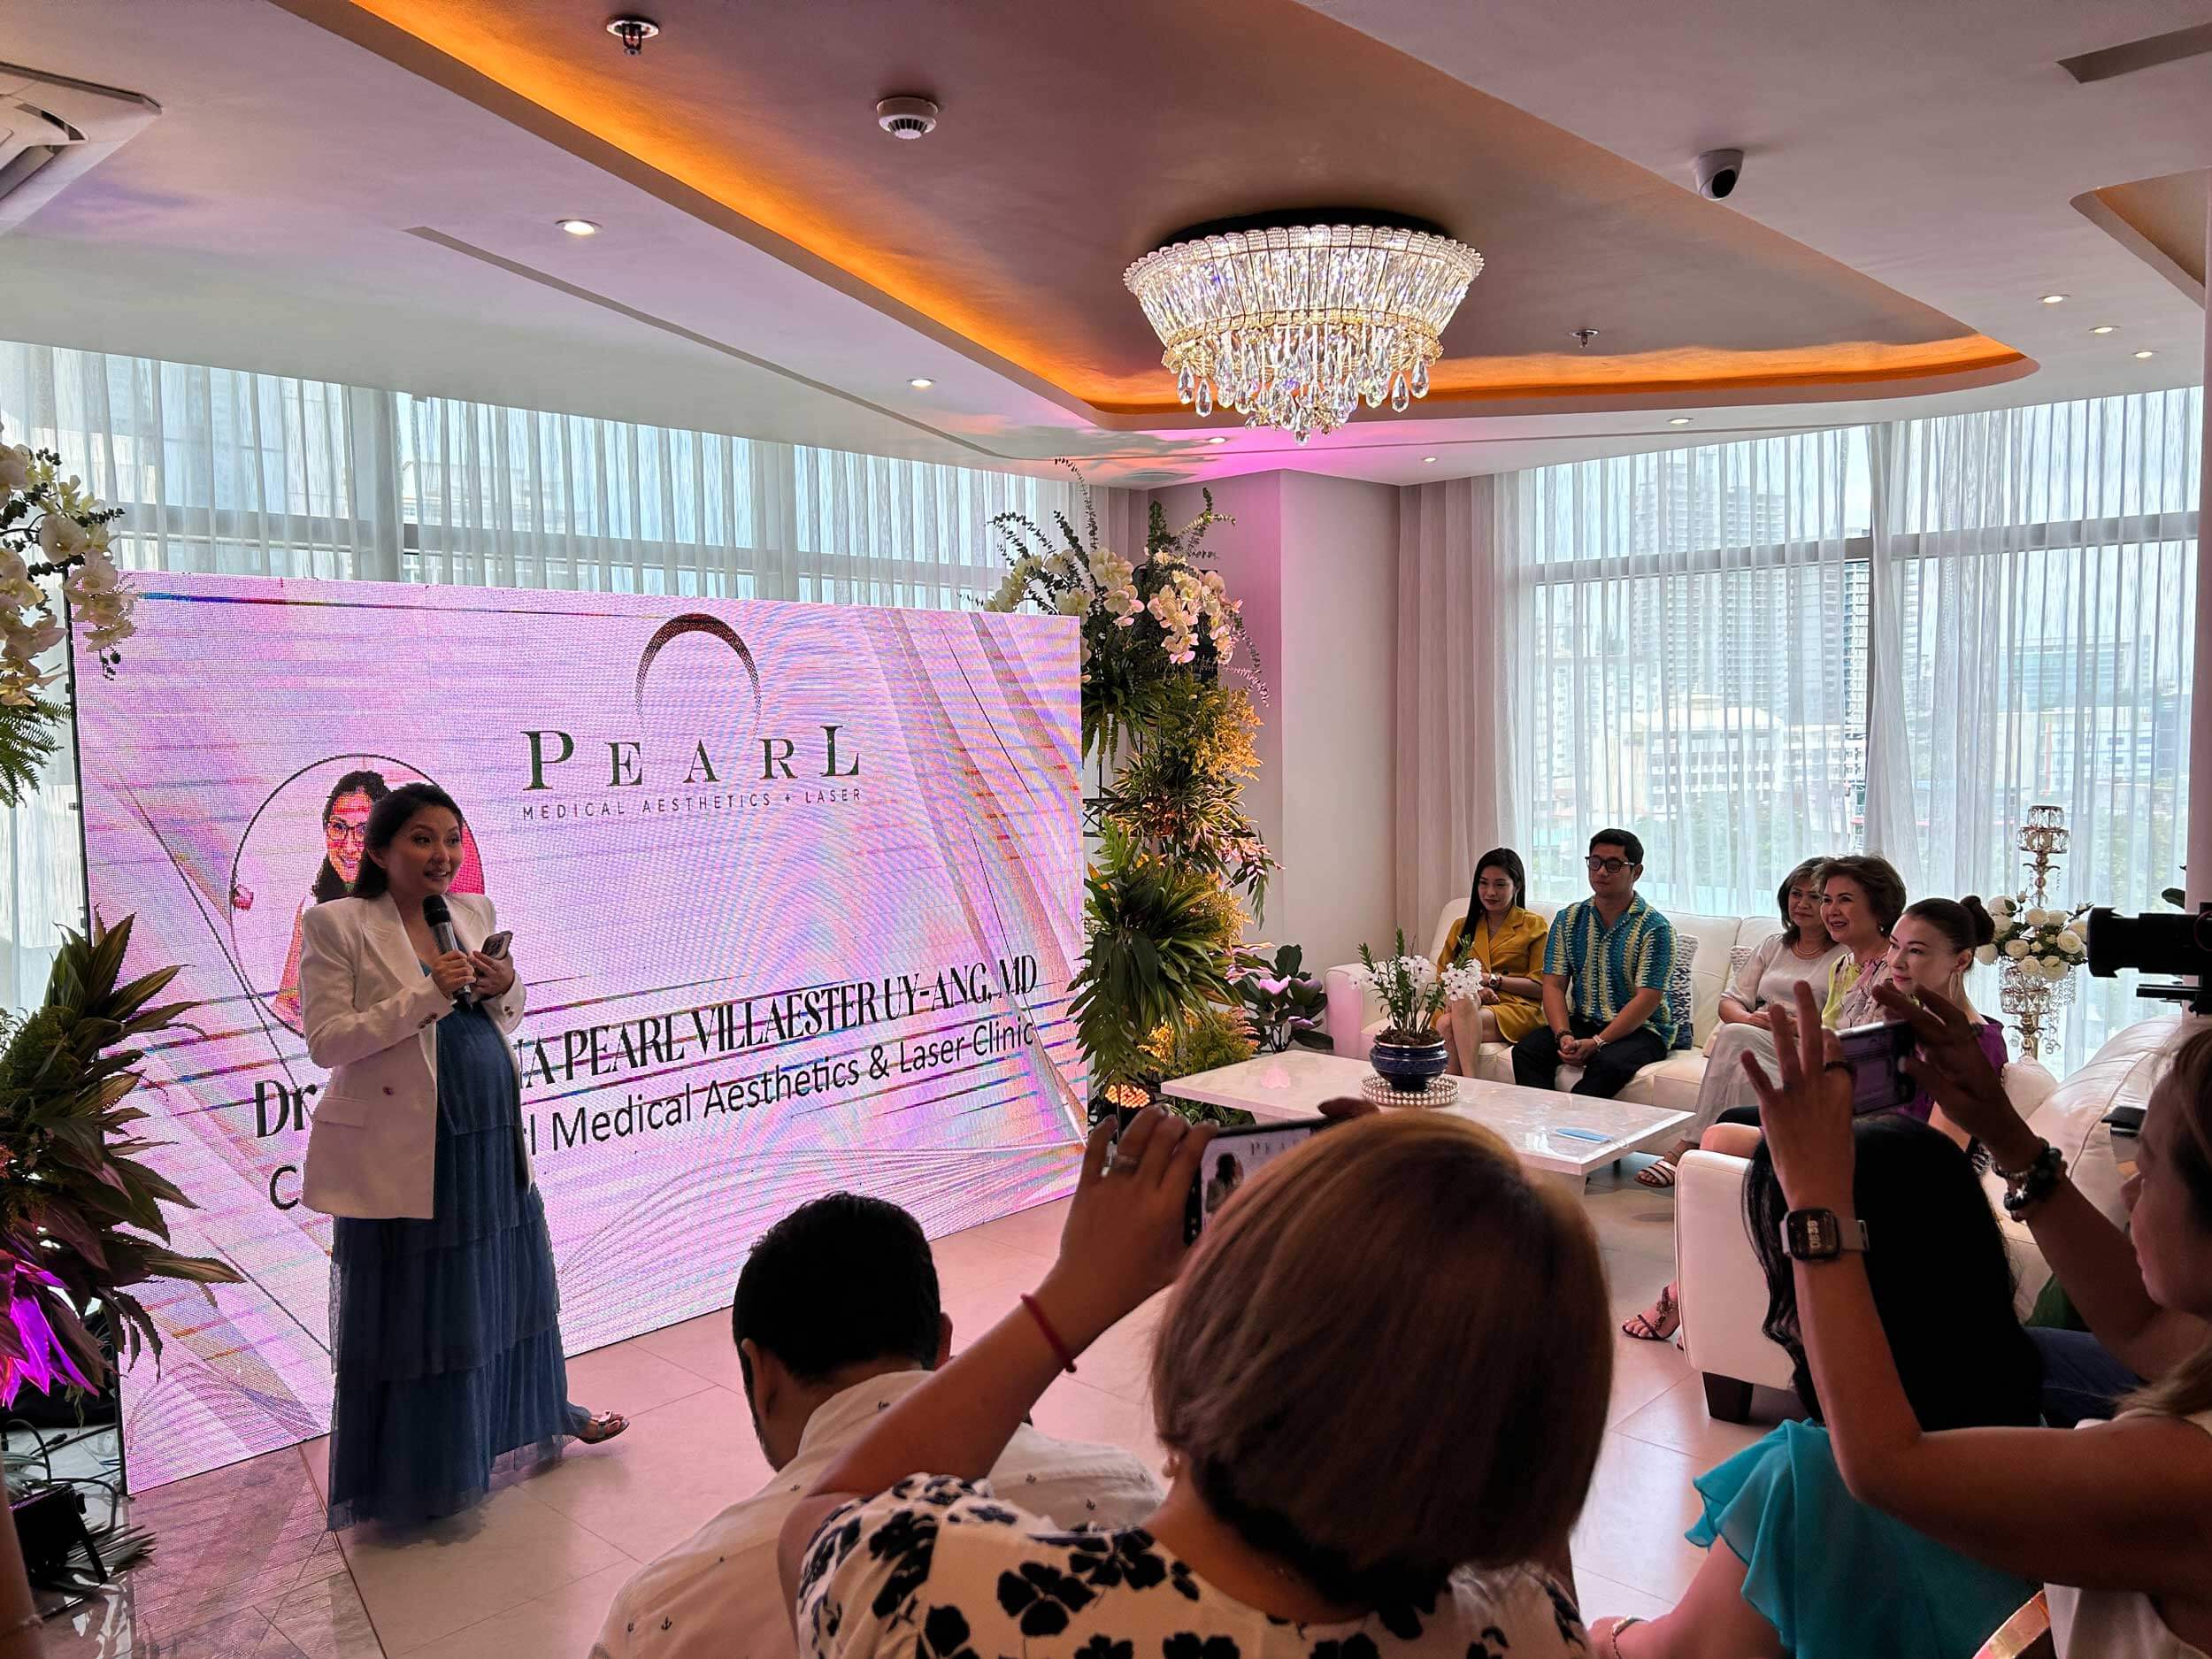 Pearl Medical Aesthetics & Laser Clinic CEO, Dr. Shahana Pearl V. Uy-Ang speaks during the opening of its new wing.